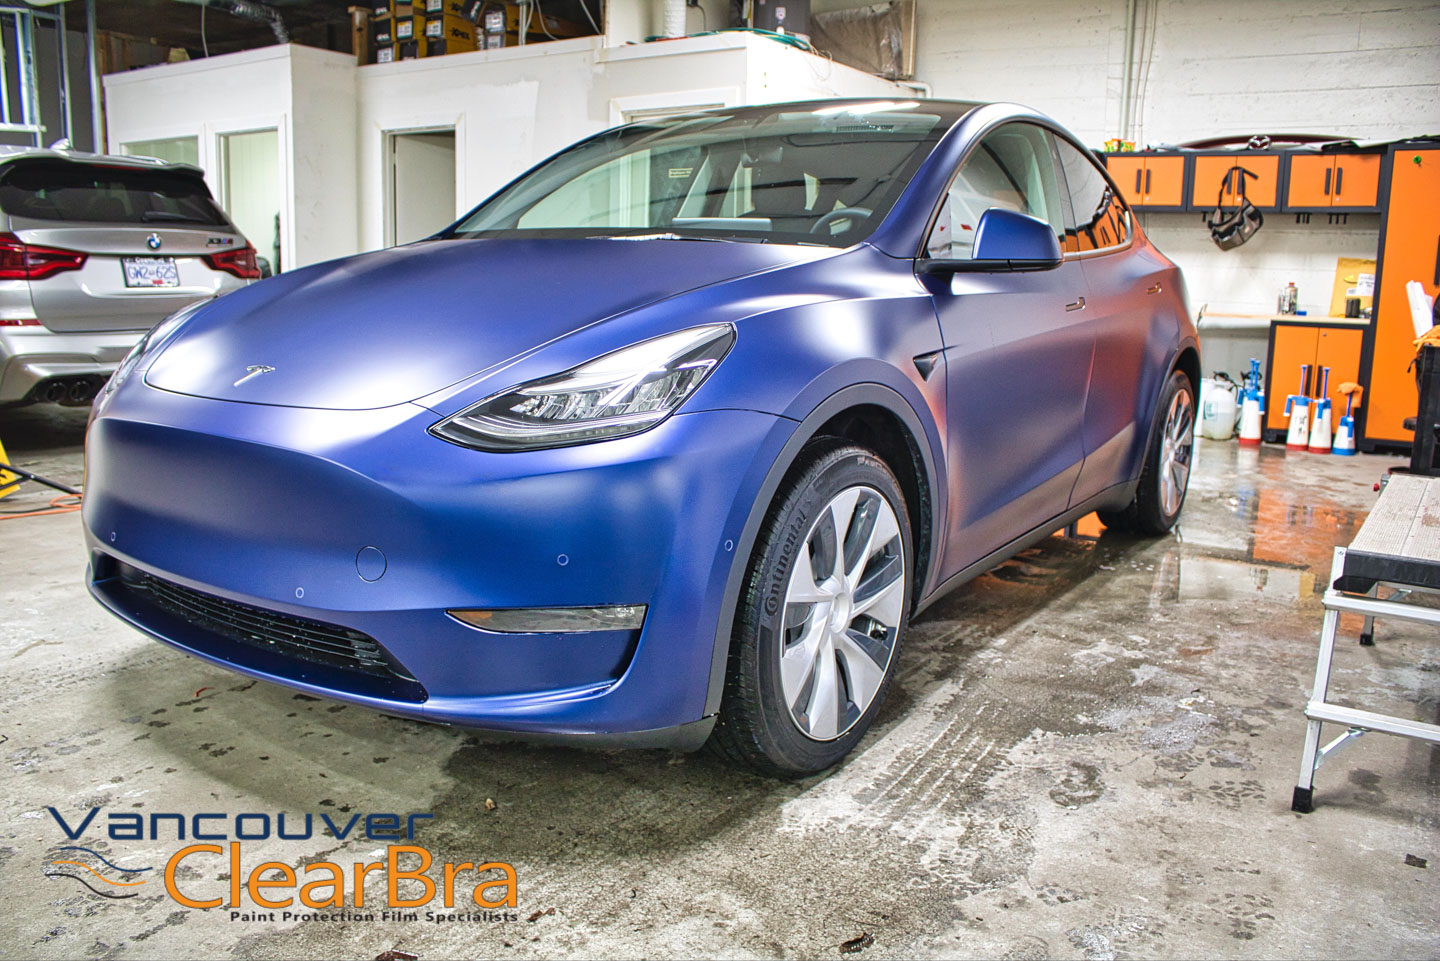 paint protection in vancouver